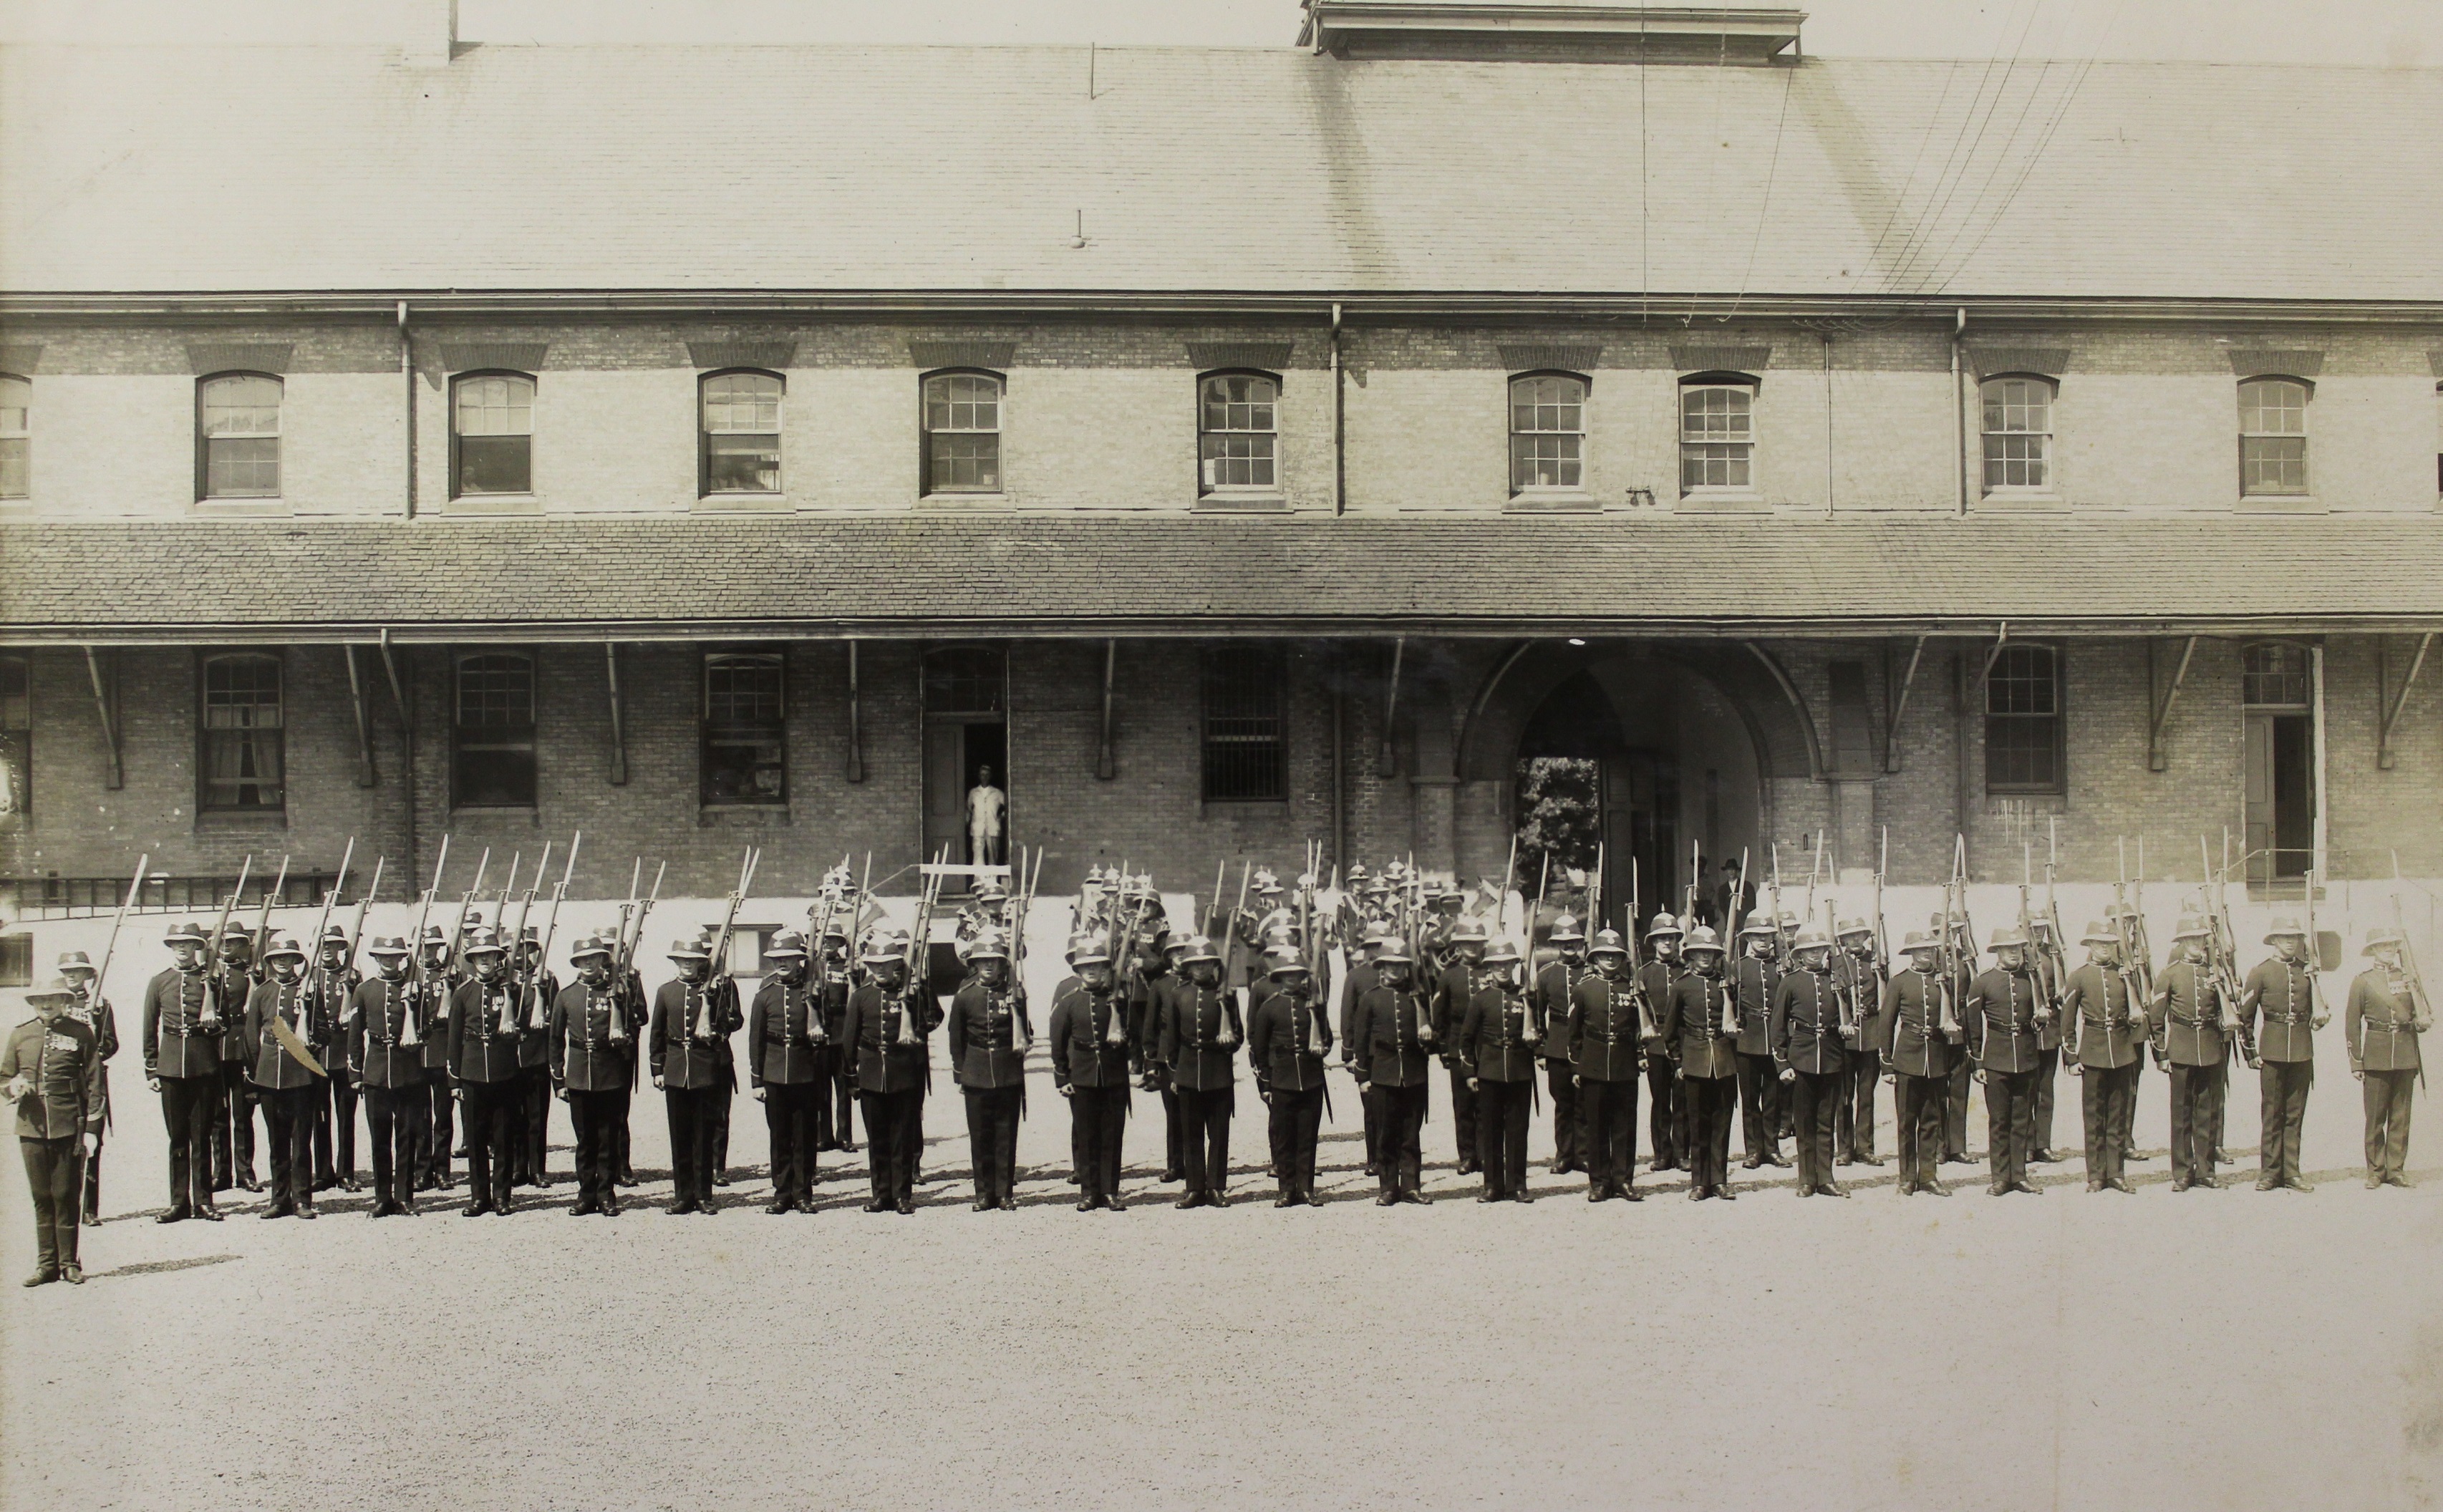 Guard of Honour for the Governor General at Wolseley Barracks, June 21, 1927